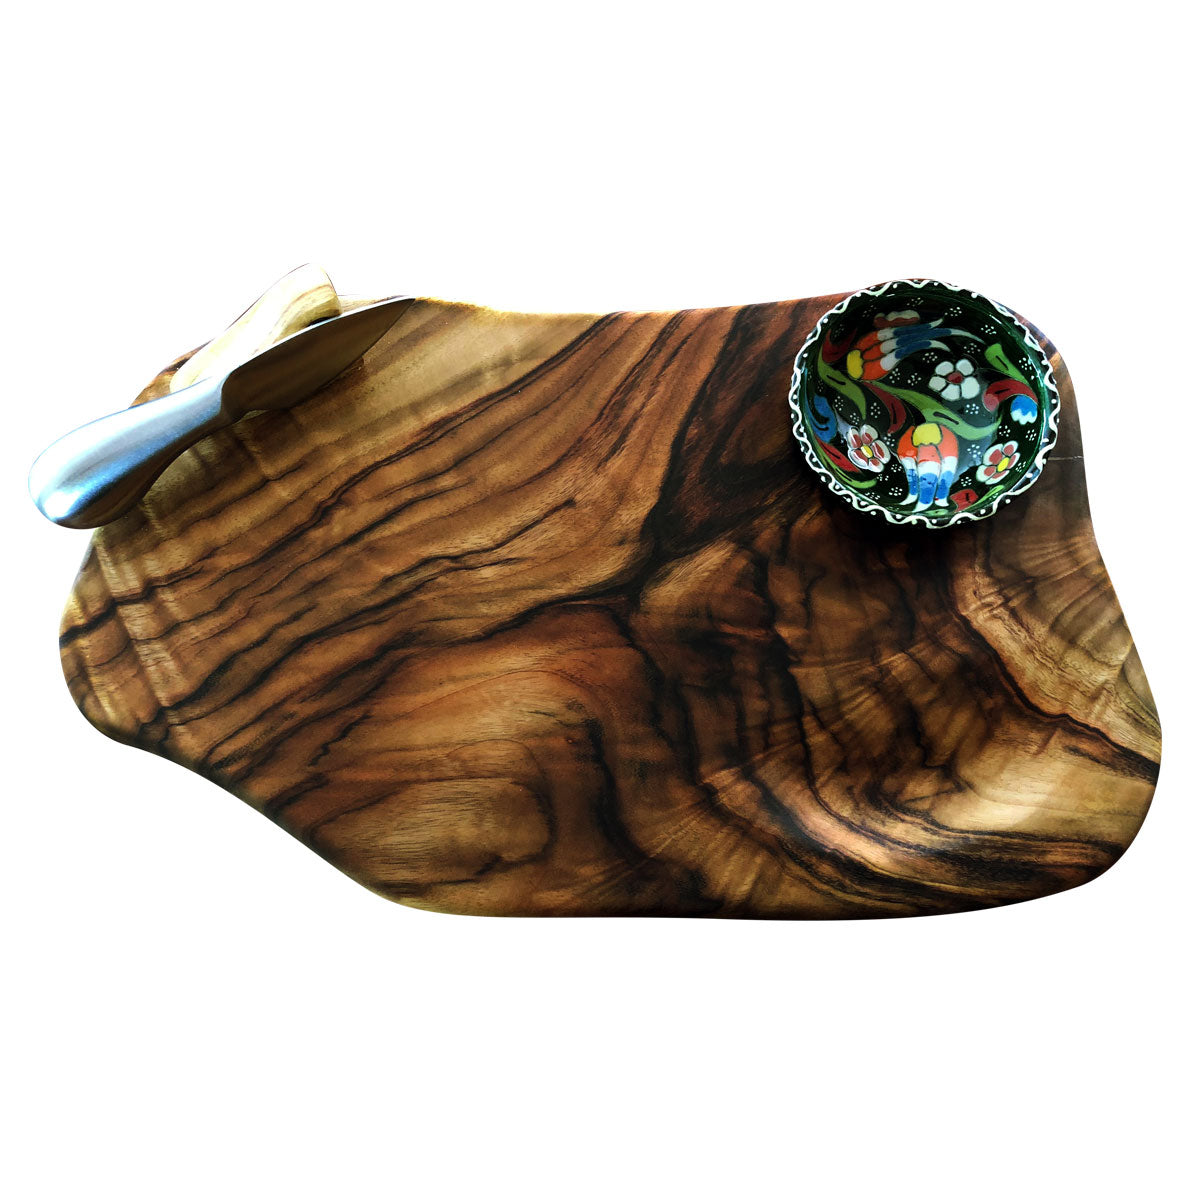 The Petite Platter is a small freefro camphor laurel wood cheese board with a magnetic knife and holder, and a small turkish bowl made by Nature's Boards